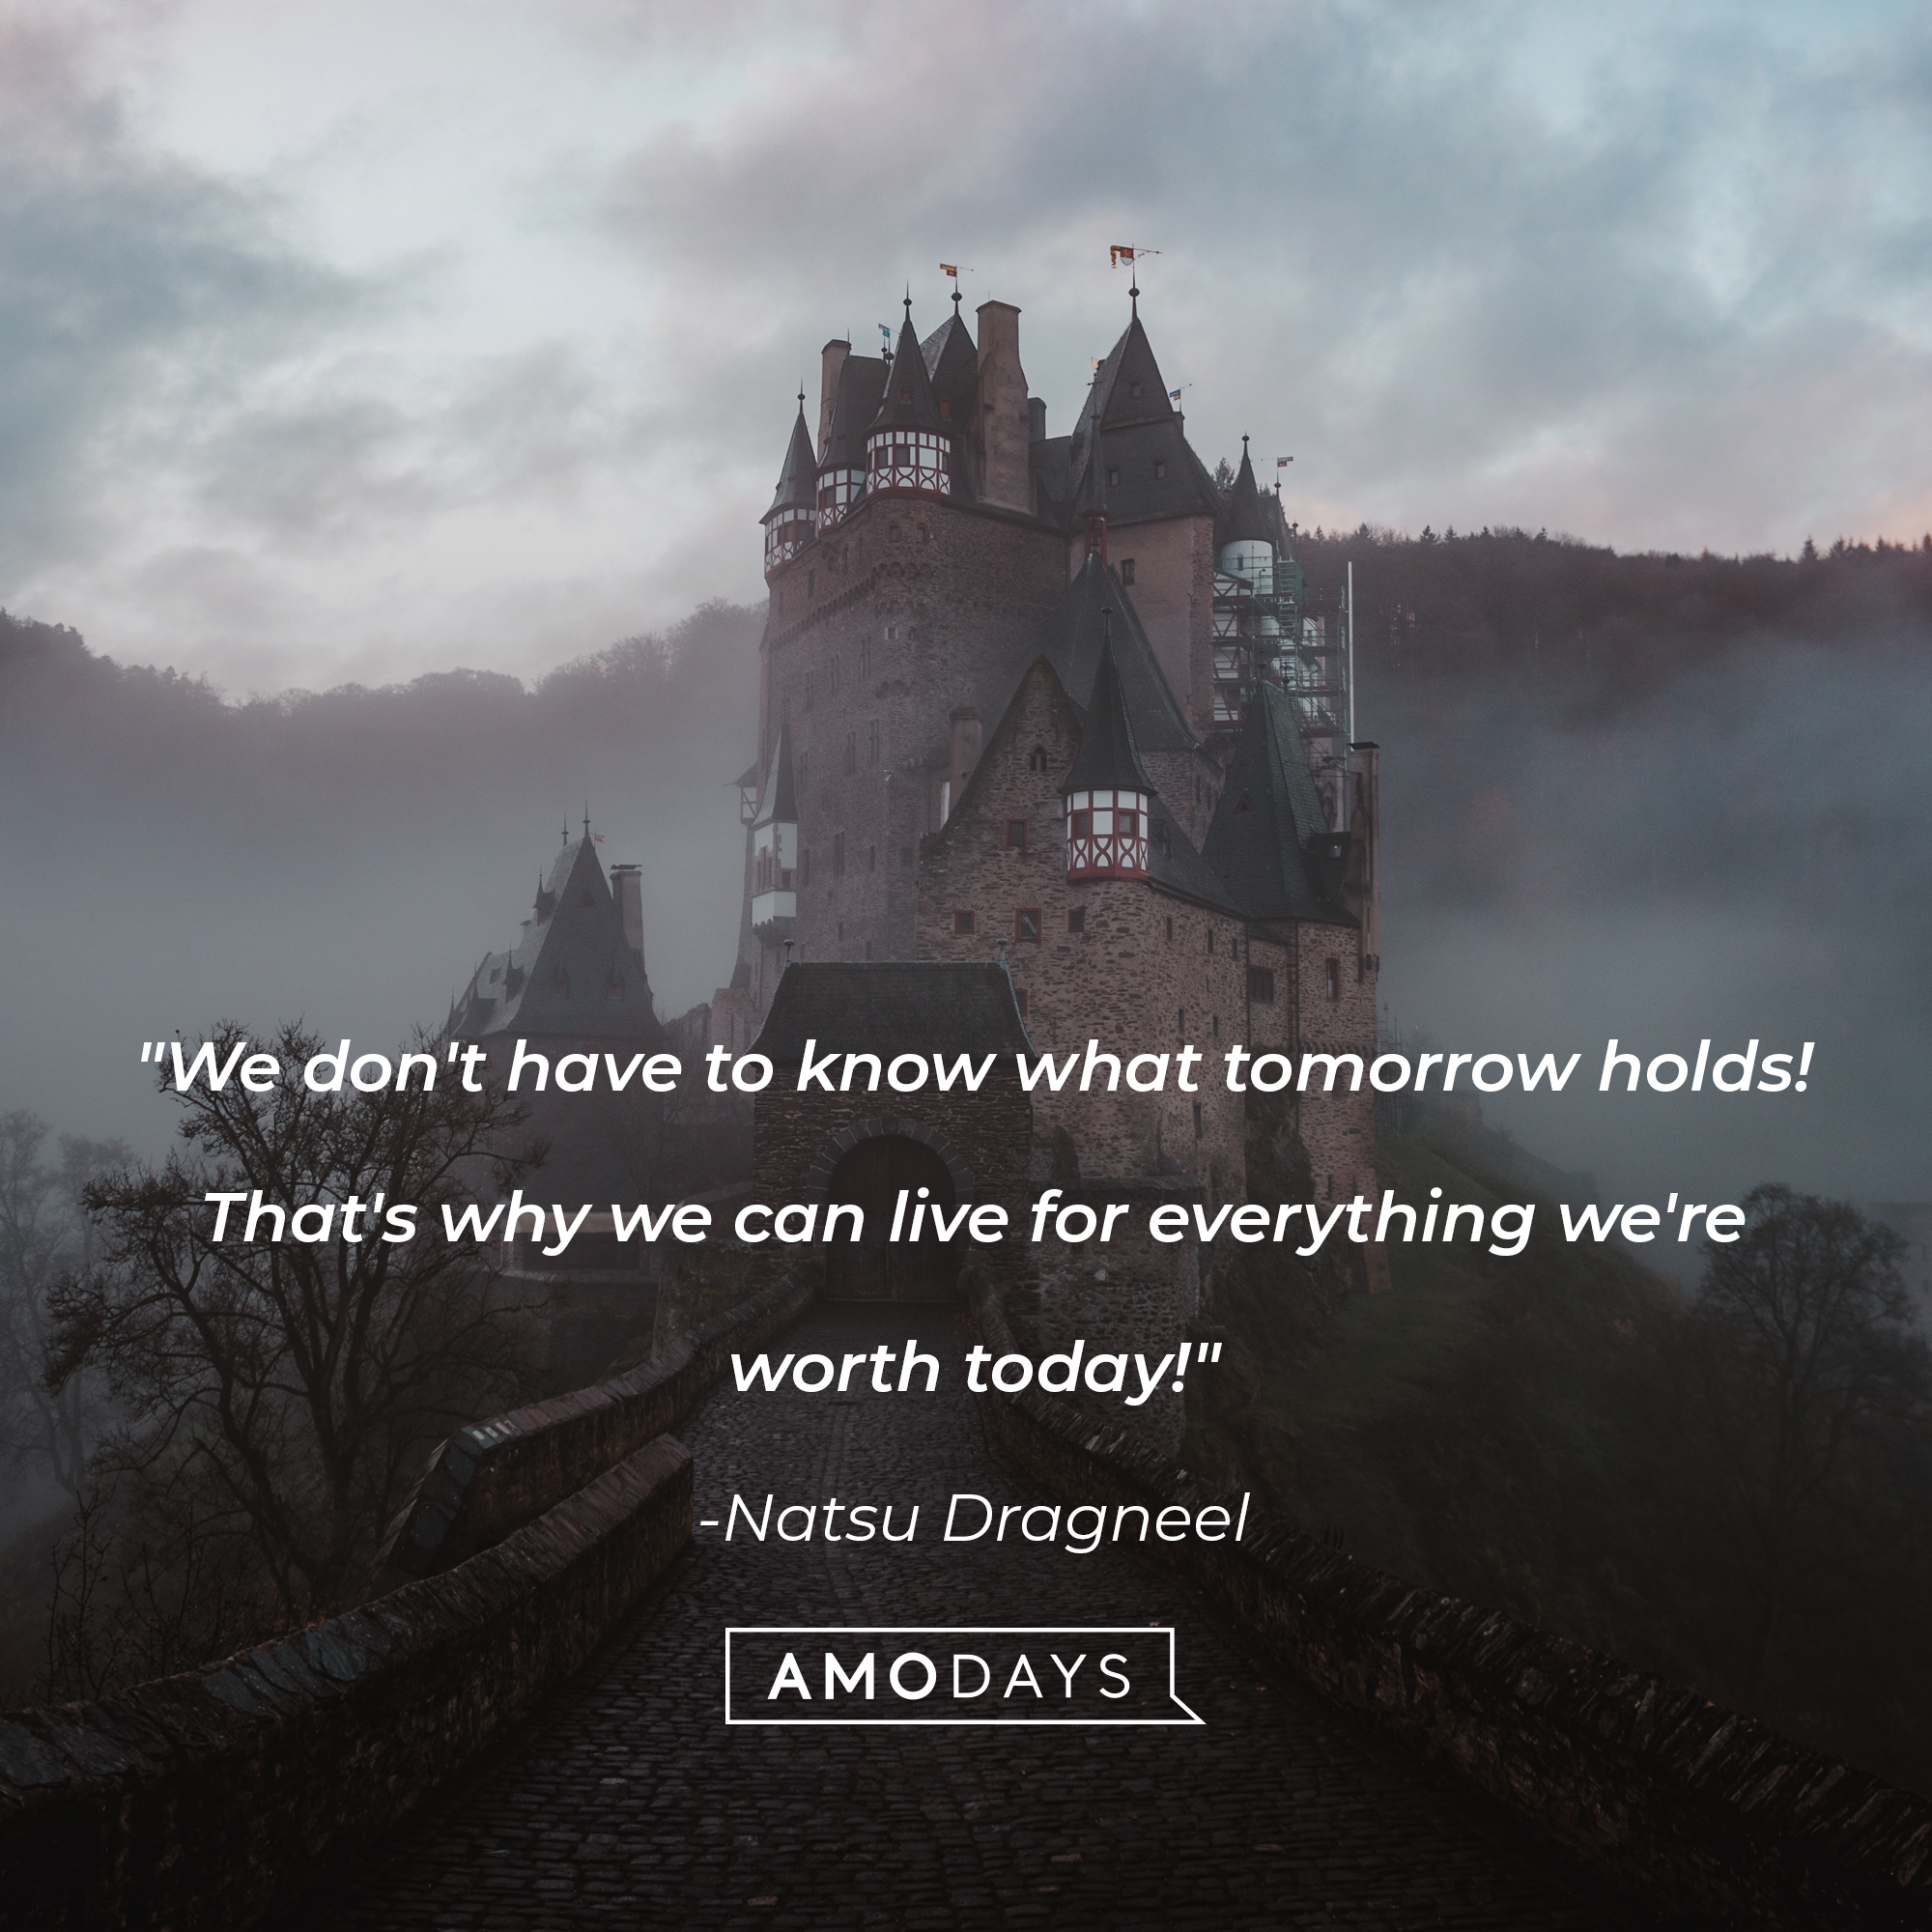 Natsu Dragneel's quote: "We don't have to know what tomorrow holds! That's why we can live for everything we're worth today!" | Image: Unsplash